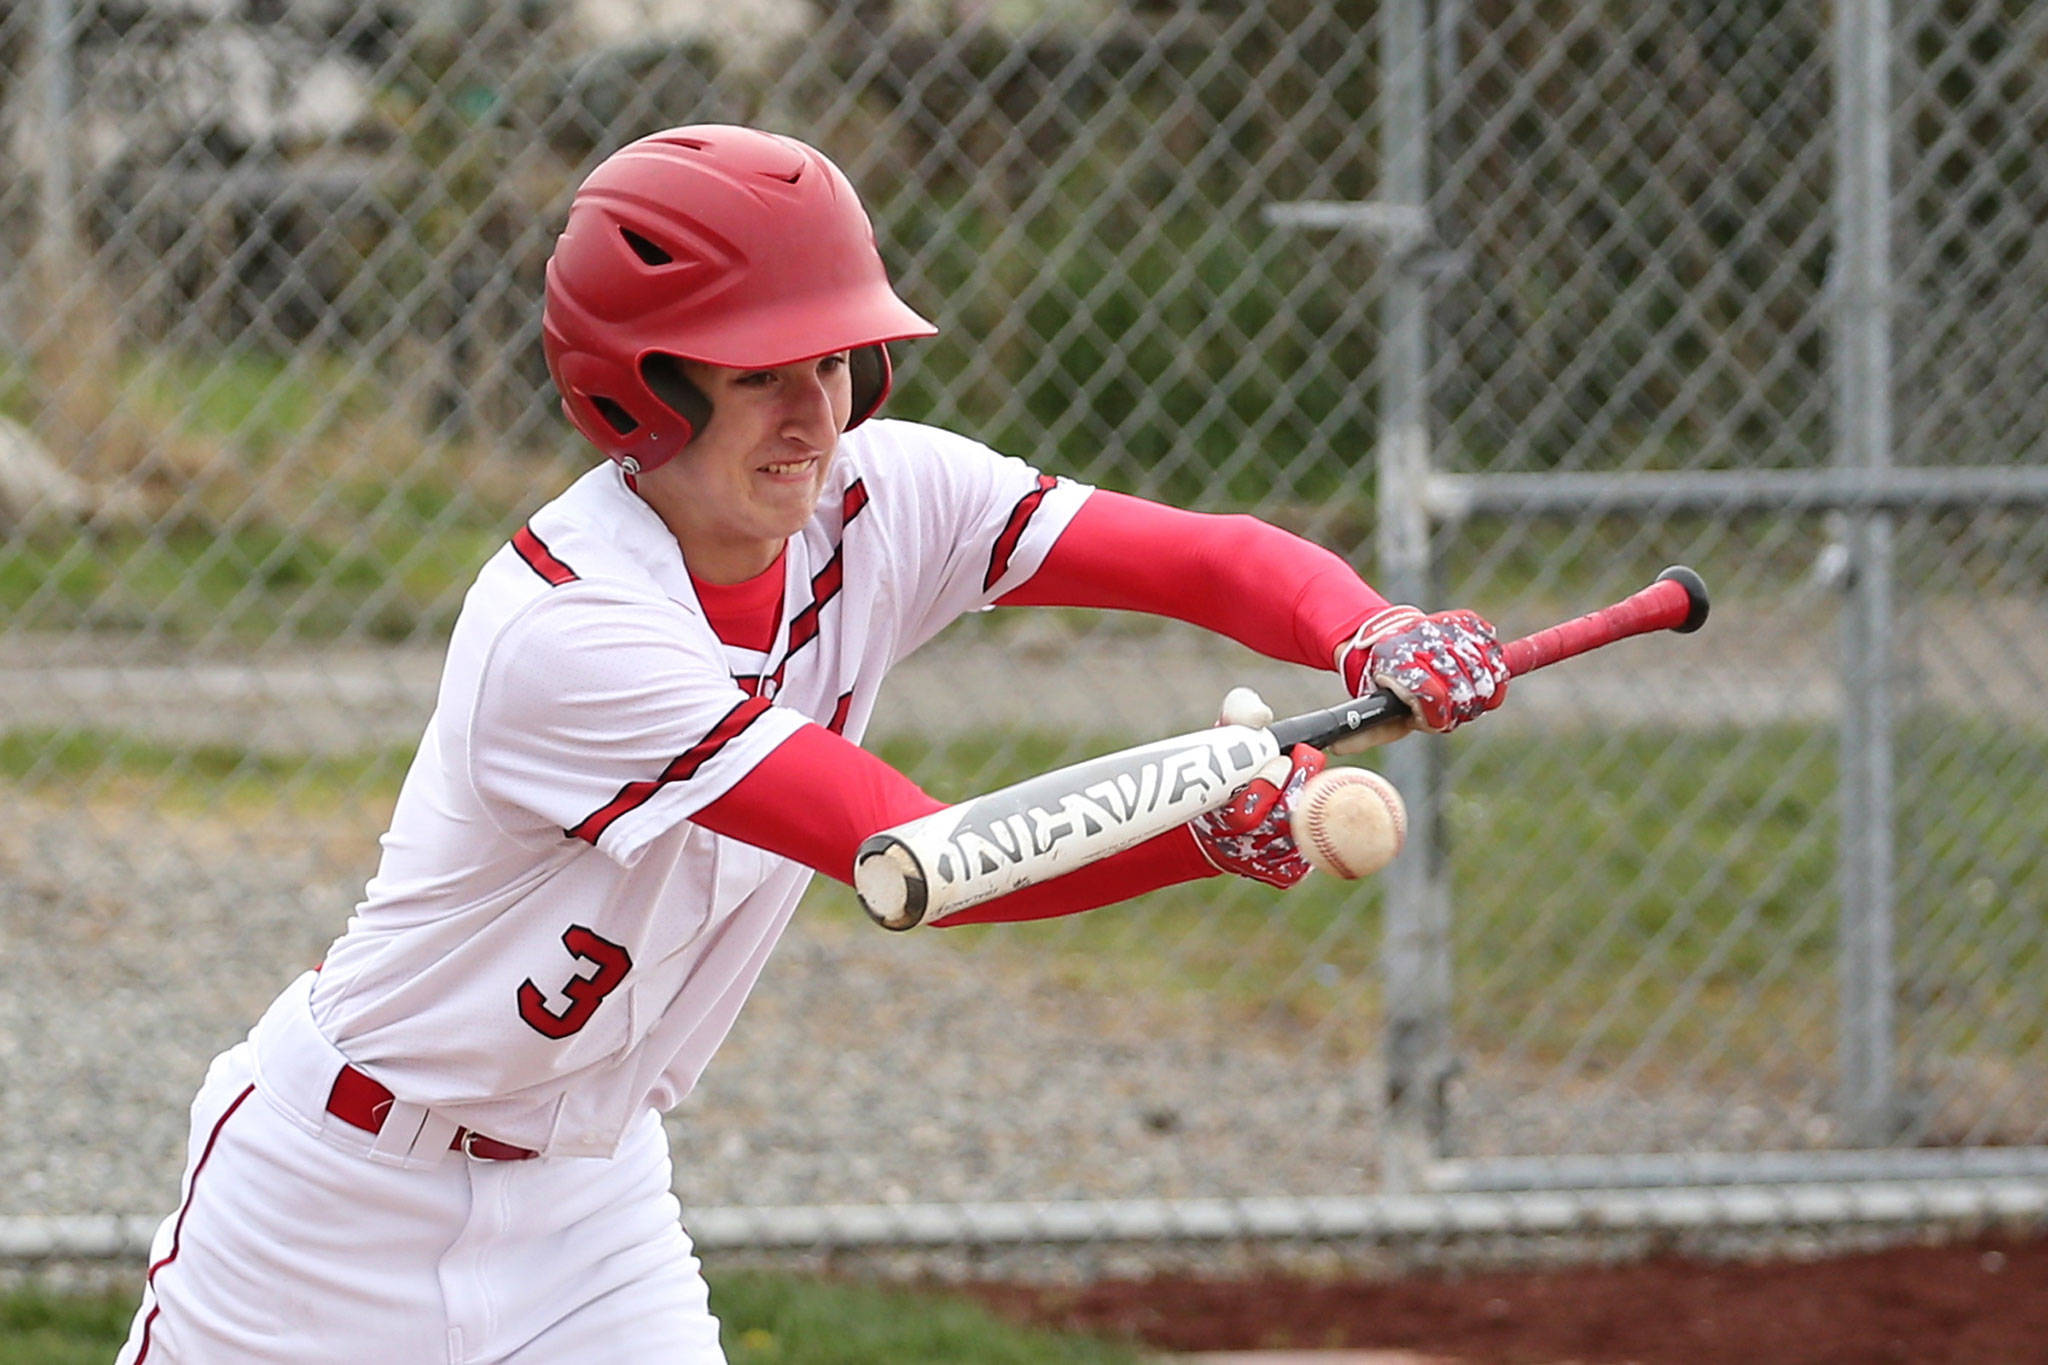 Joey Lippo puts down a bunt for a base hit Saturday. He later ripped a game-tying triple in the eighth inning for the Wolves.(Photo by John Fisken)